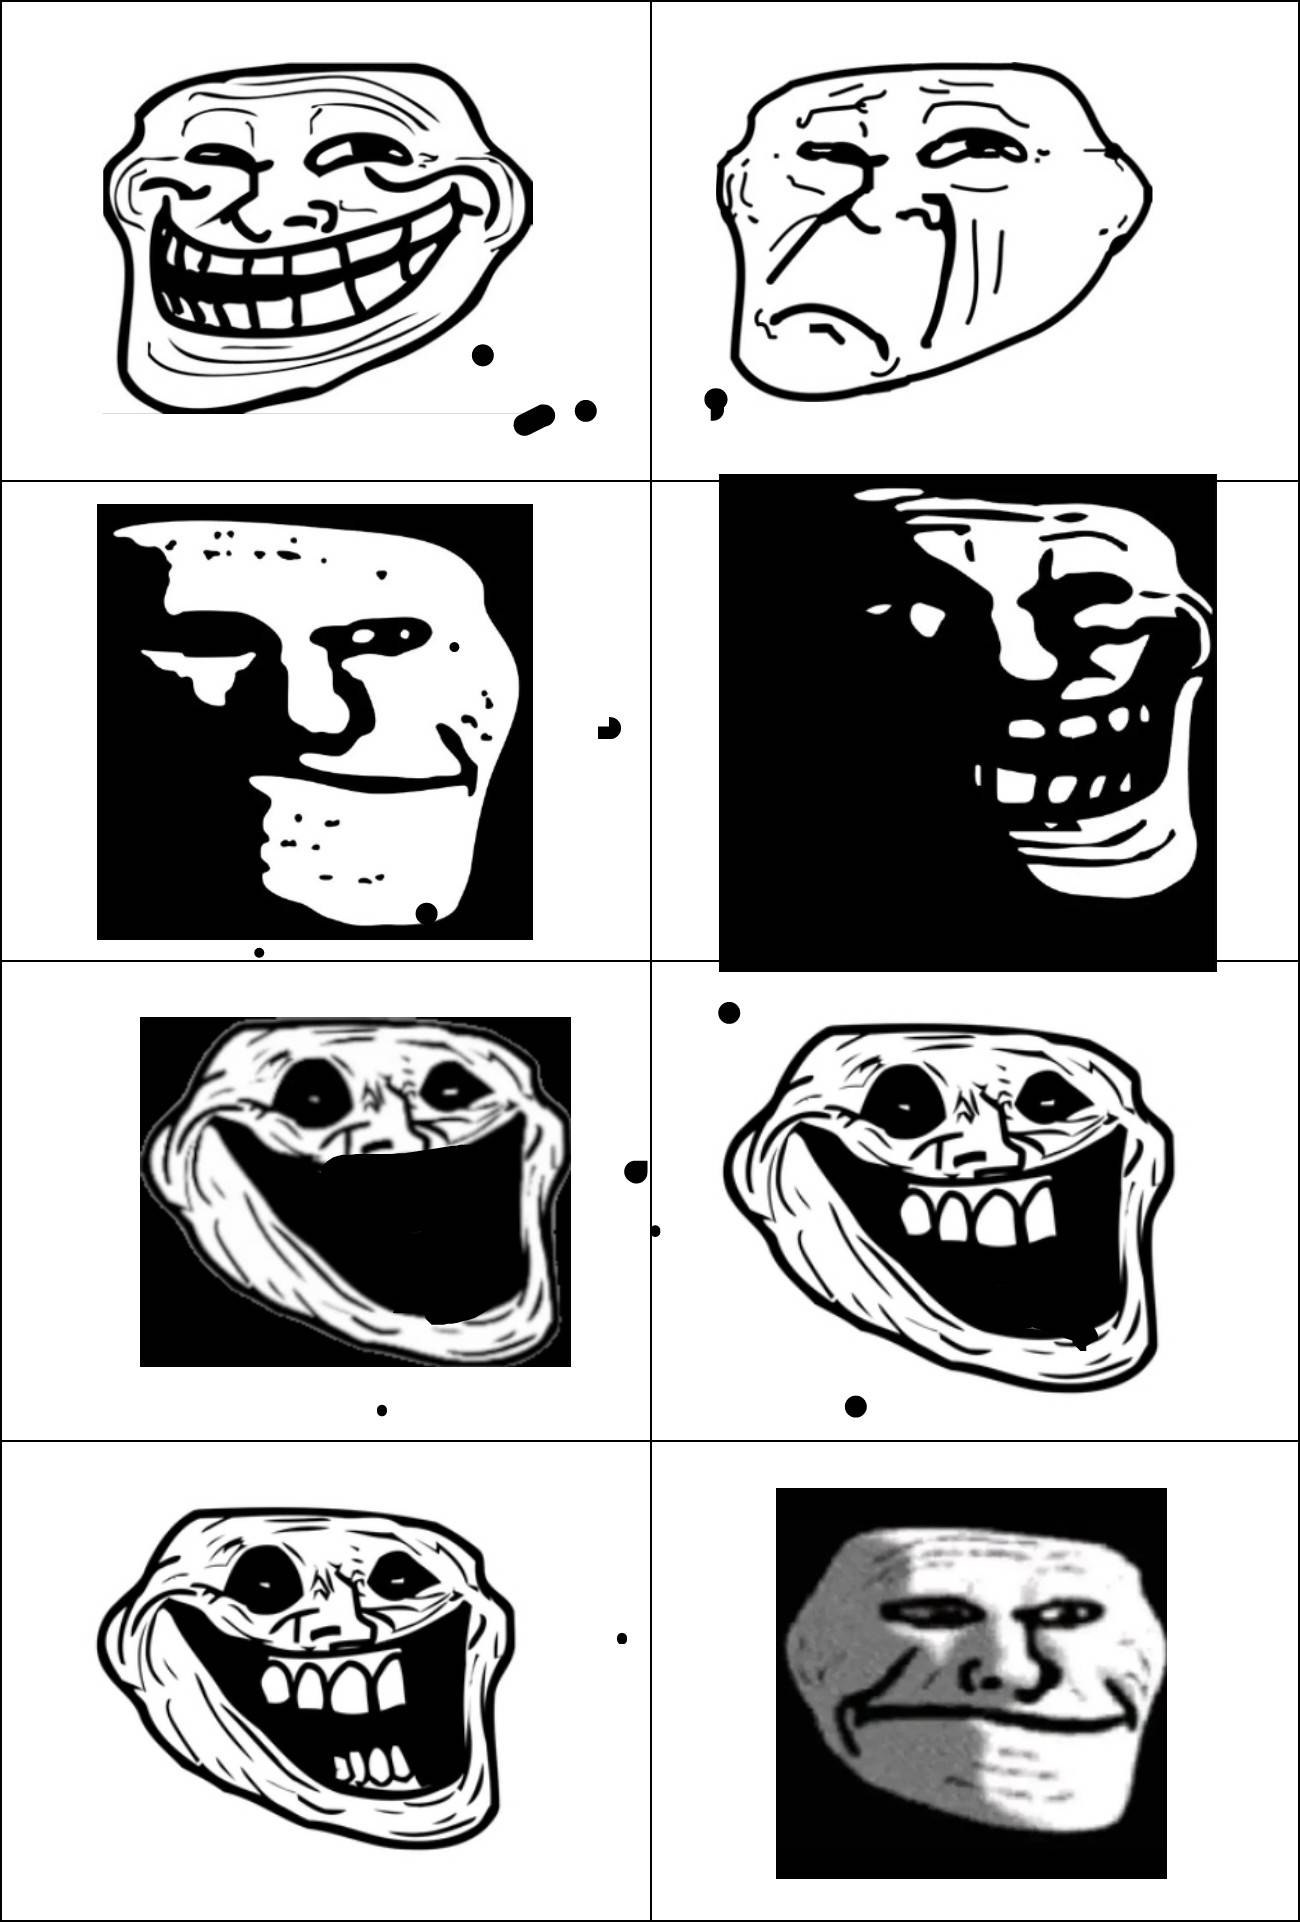 This is the story of troll face by trollge2015 on DeviantArt